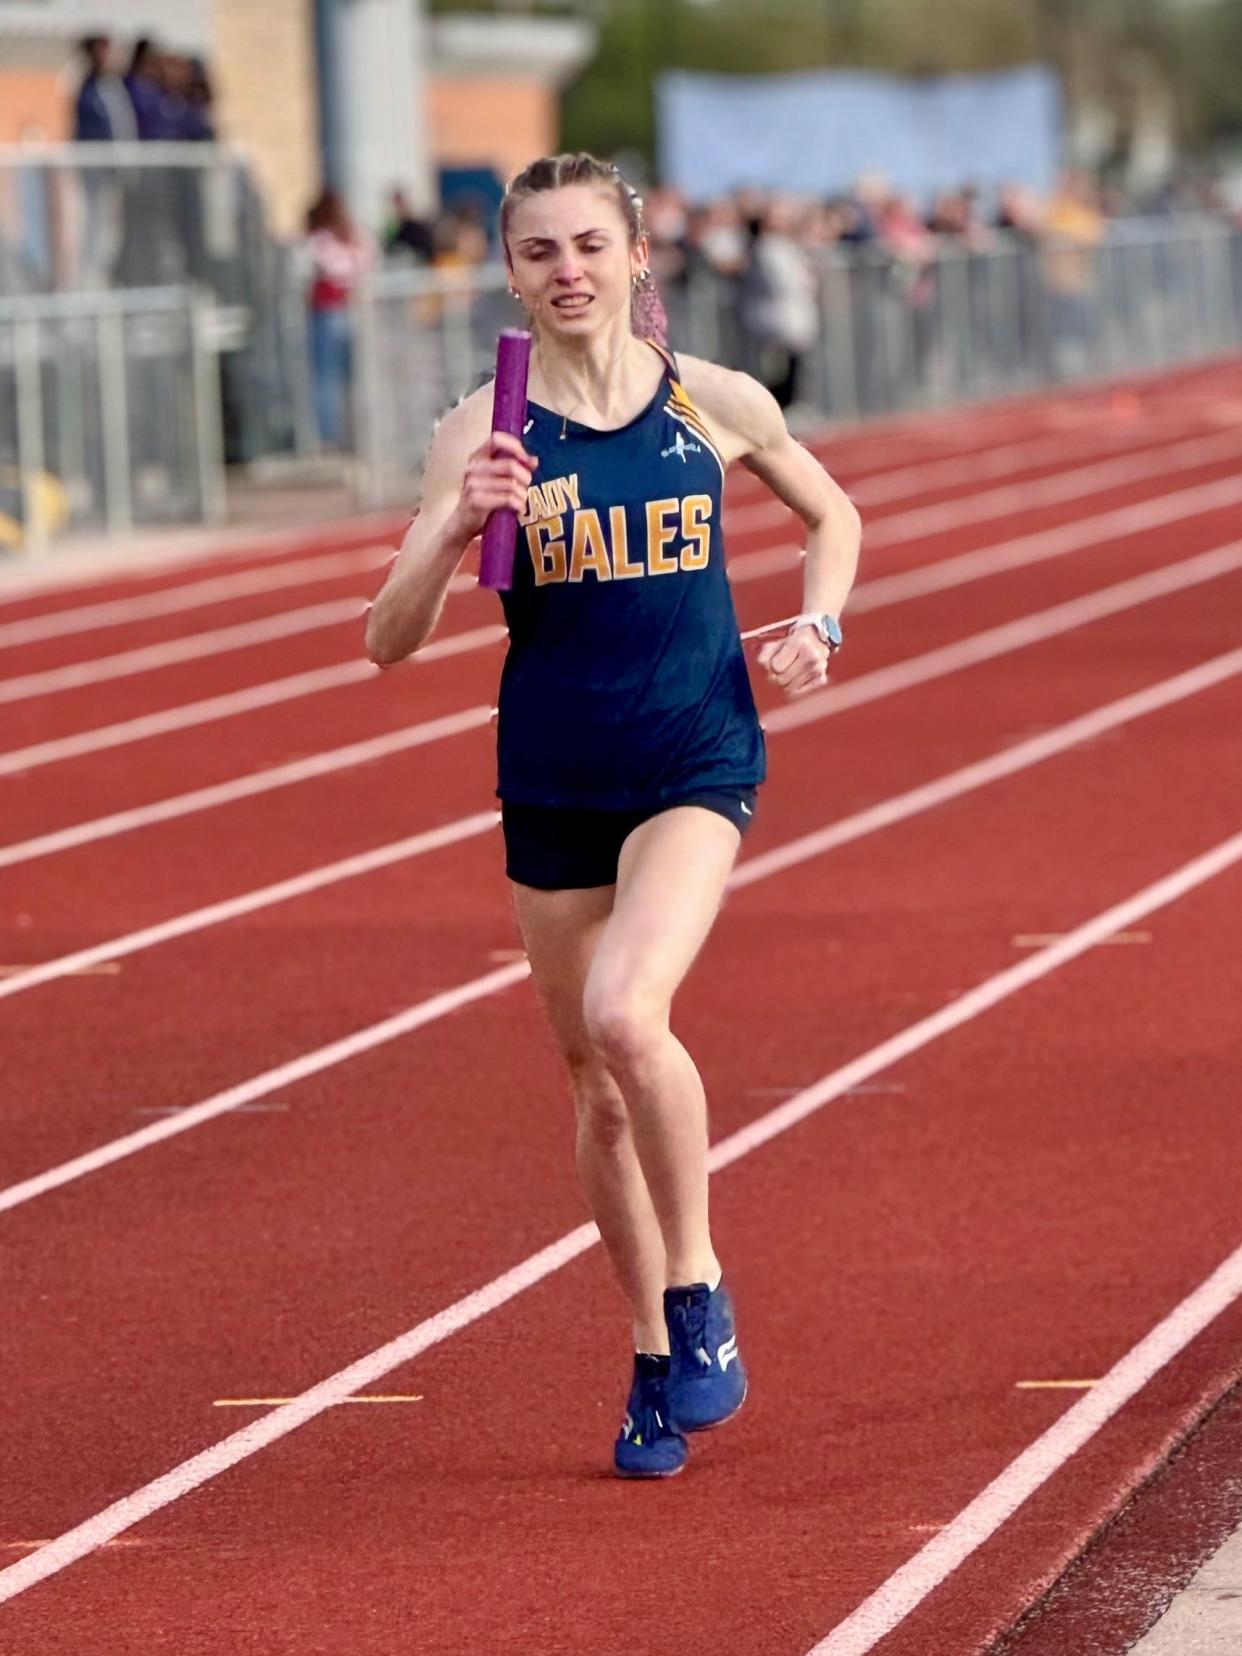 Lancaster's Marisa Heil runs during a relay during the Lancaster Fulton Relays. Heil was part of the 4x1600 relay team that broke a school record during the meet as the Lady Gales won the 10-team event for the seventh consecutive year.